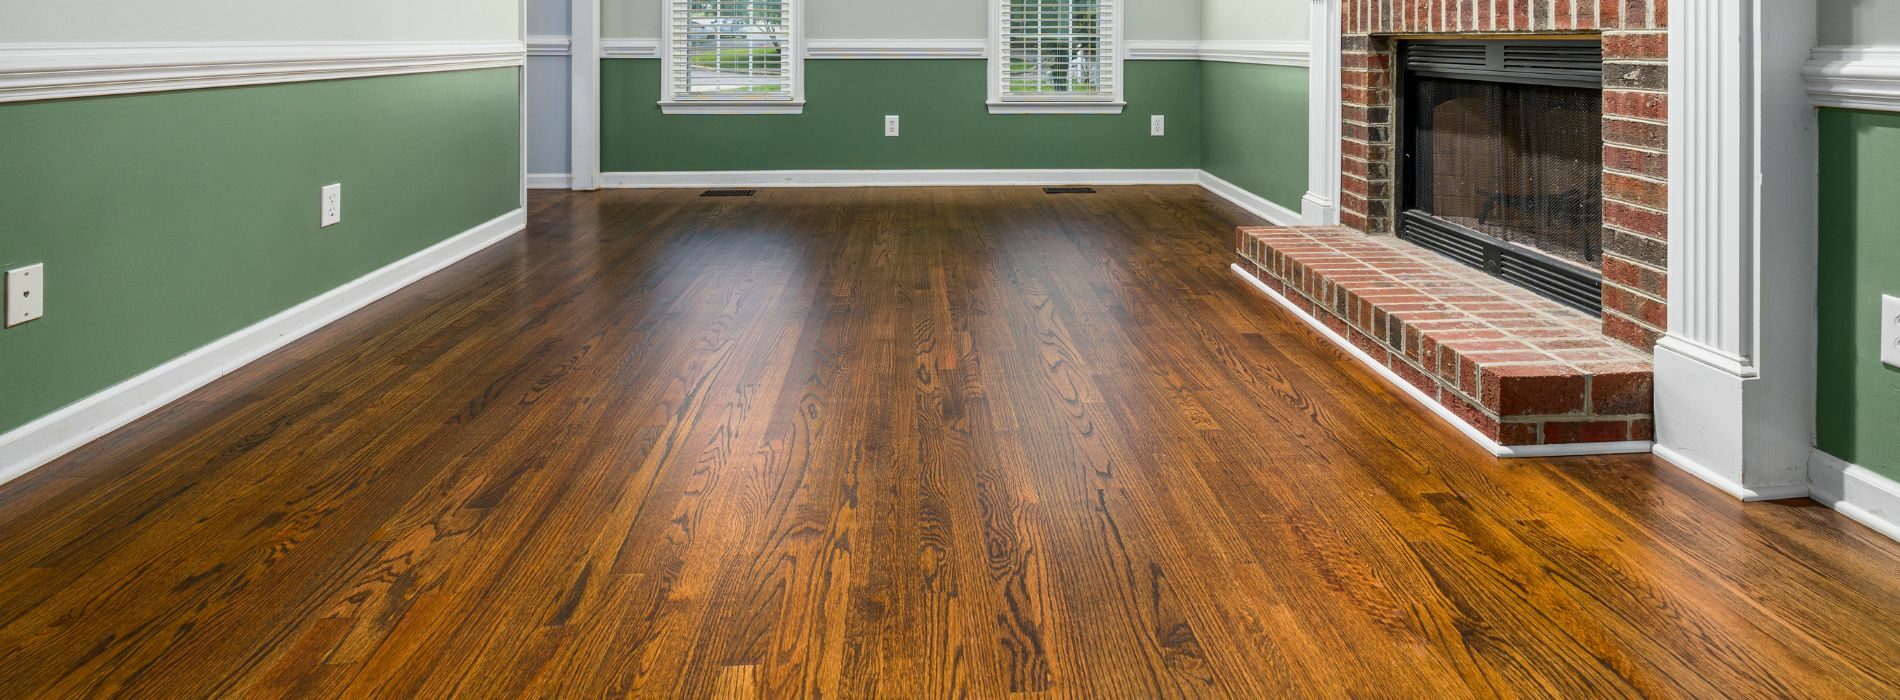 Stunningly restored 5-year-old hardwood floor in Chigwell, IG7. Mr Sander® used Bona 2.5K Frost whitewashing and Traffic HD 15% sheen matte lacquer. Durable and beautiful, this finish ensures long-lasting beauty.